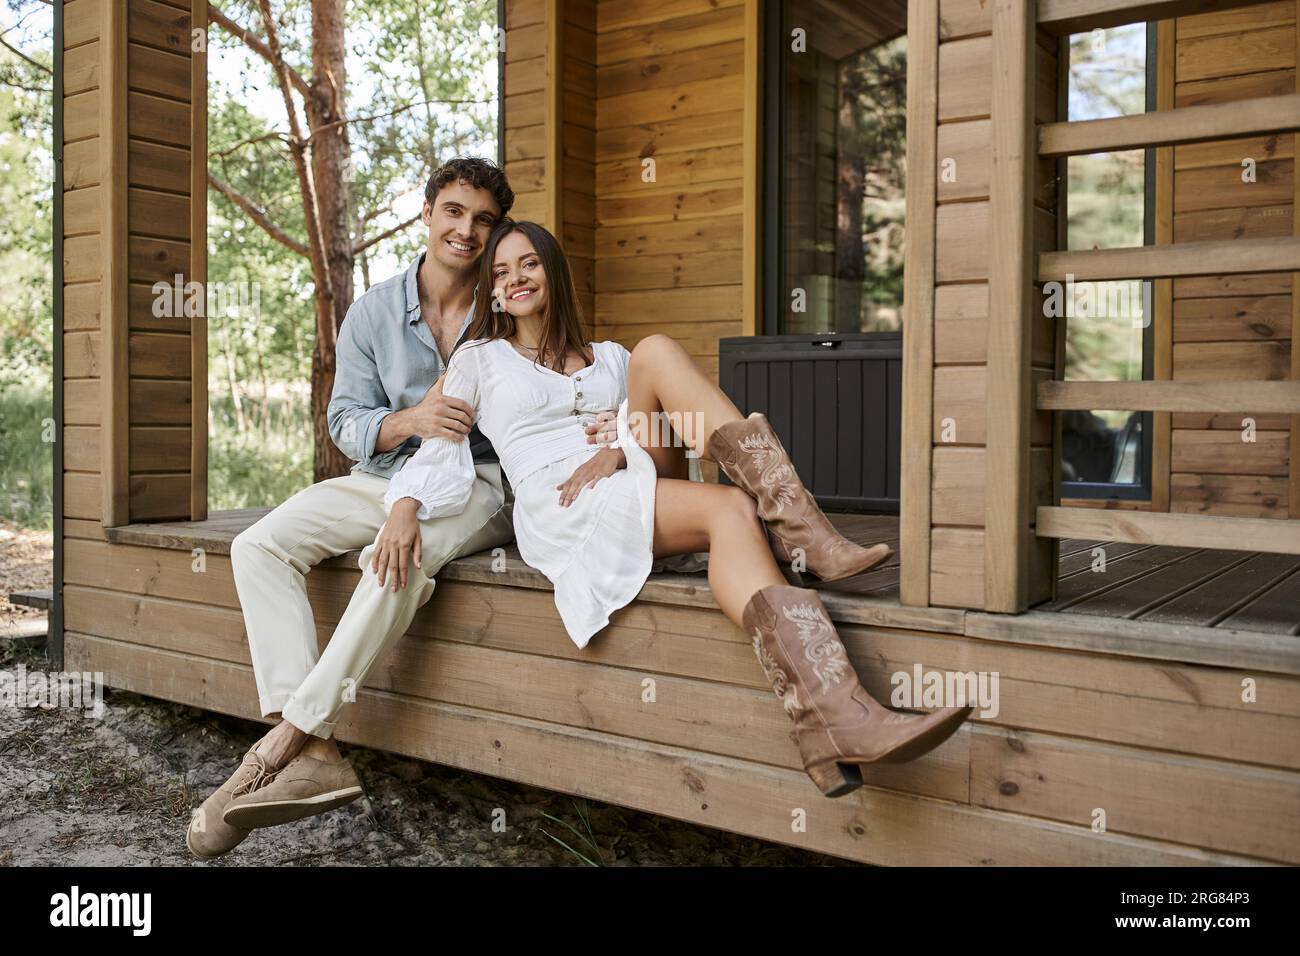 romantic getaway, man hugging cheerful woman while sitting together on porch of vacation house Stock Photo